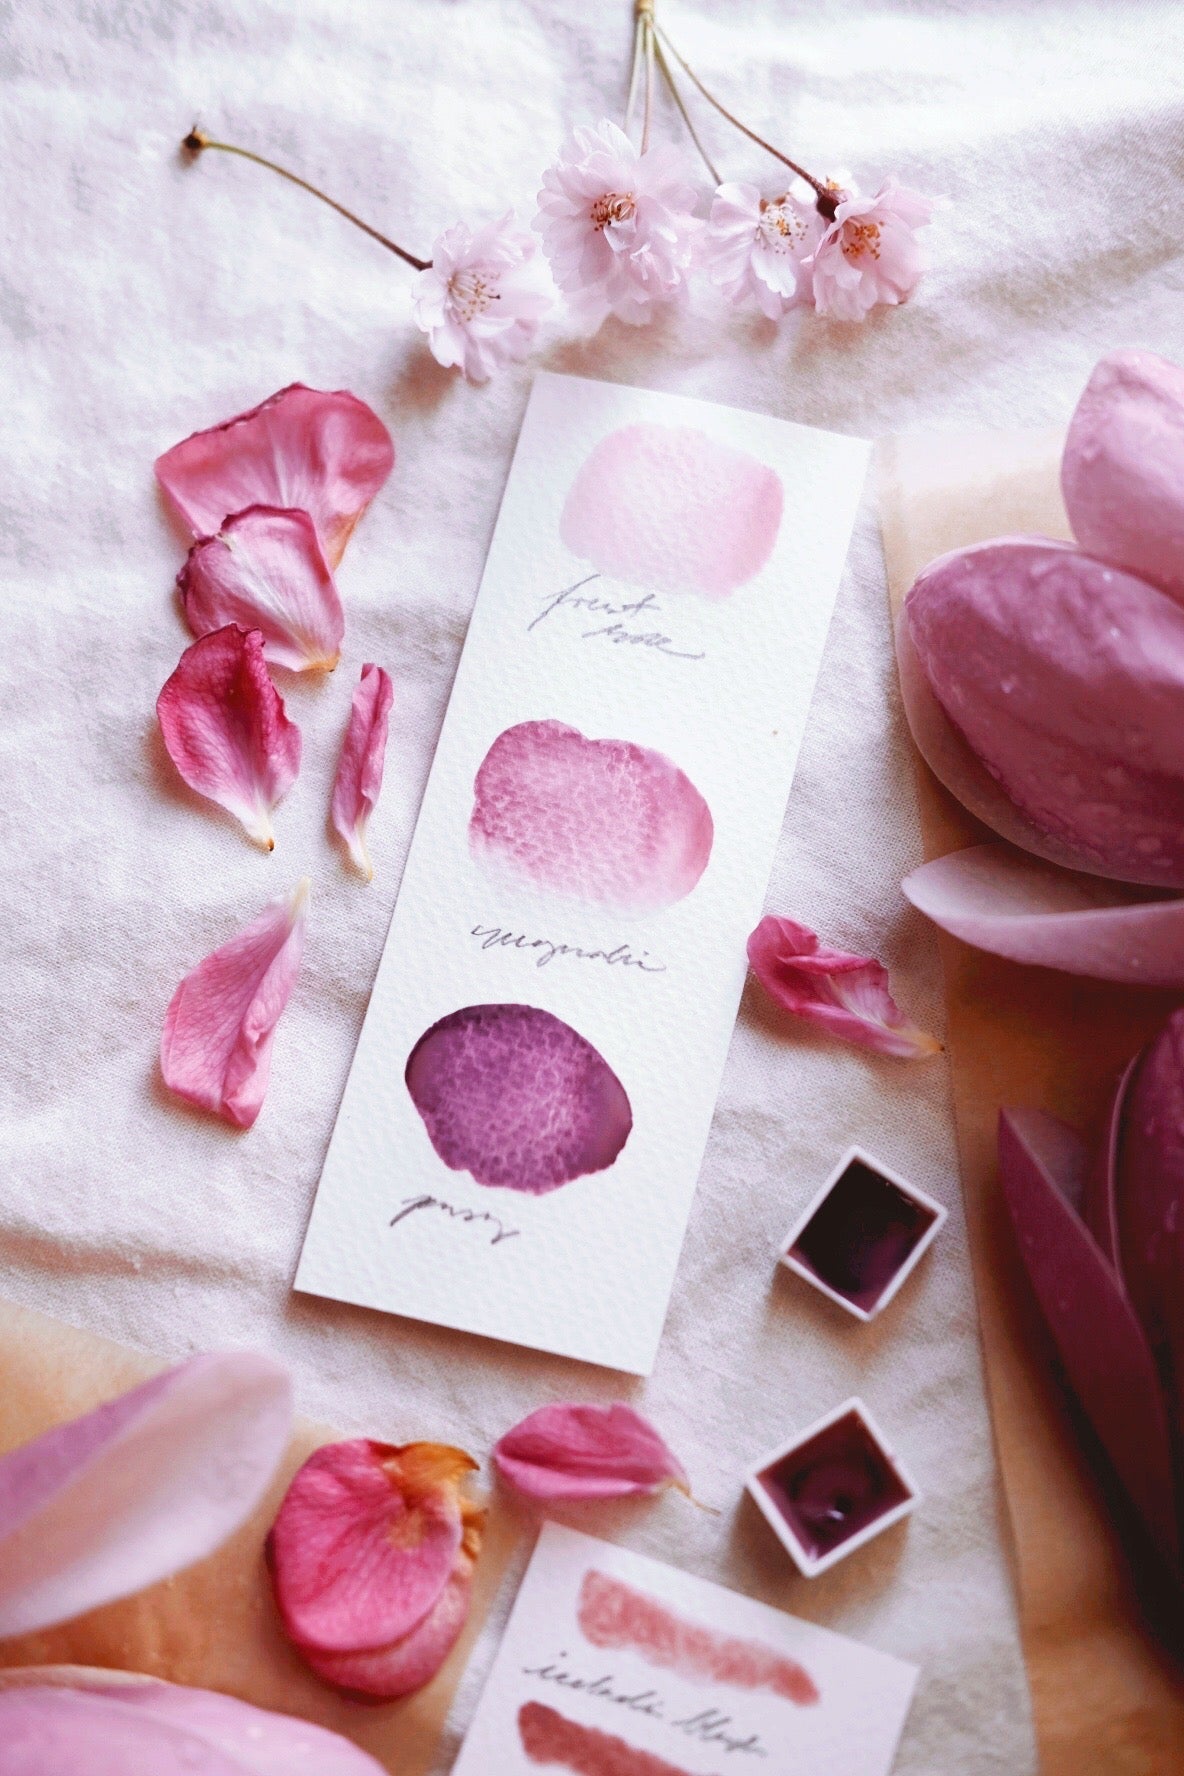 RESERVE for Dianne + Pink Blossom + Limited edition gemstone watercolor palette